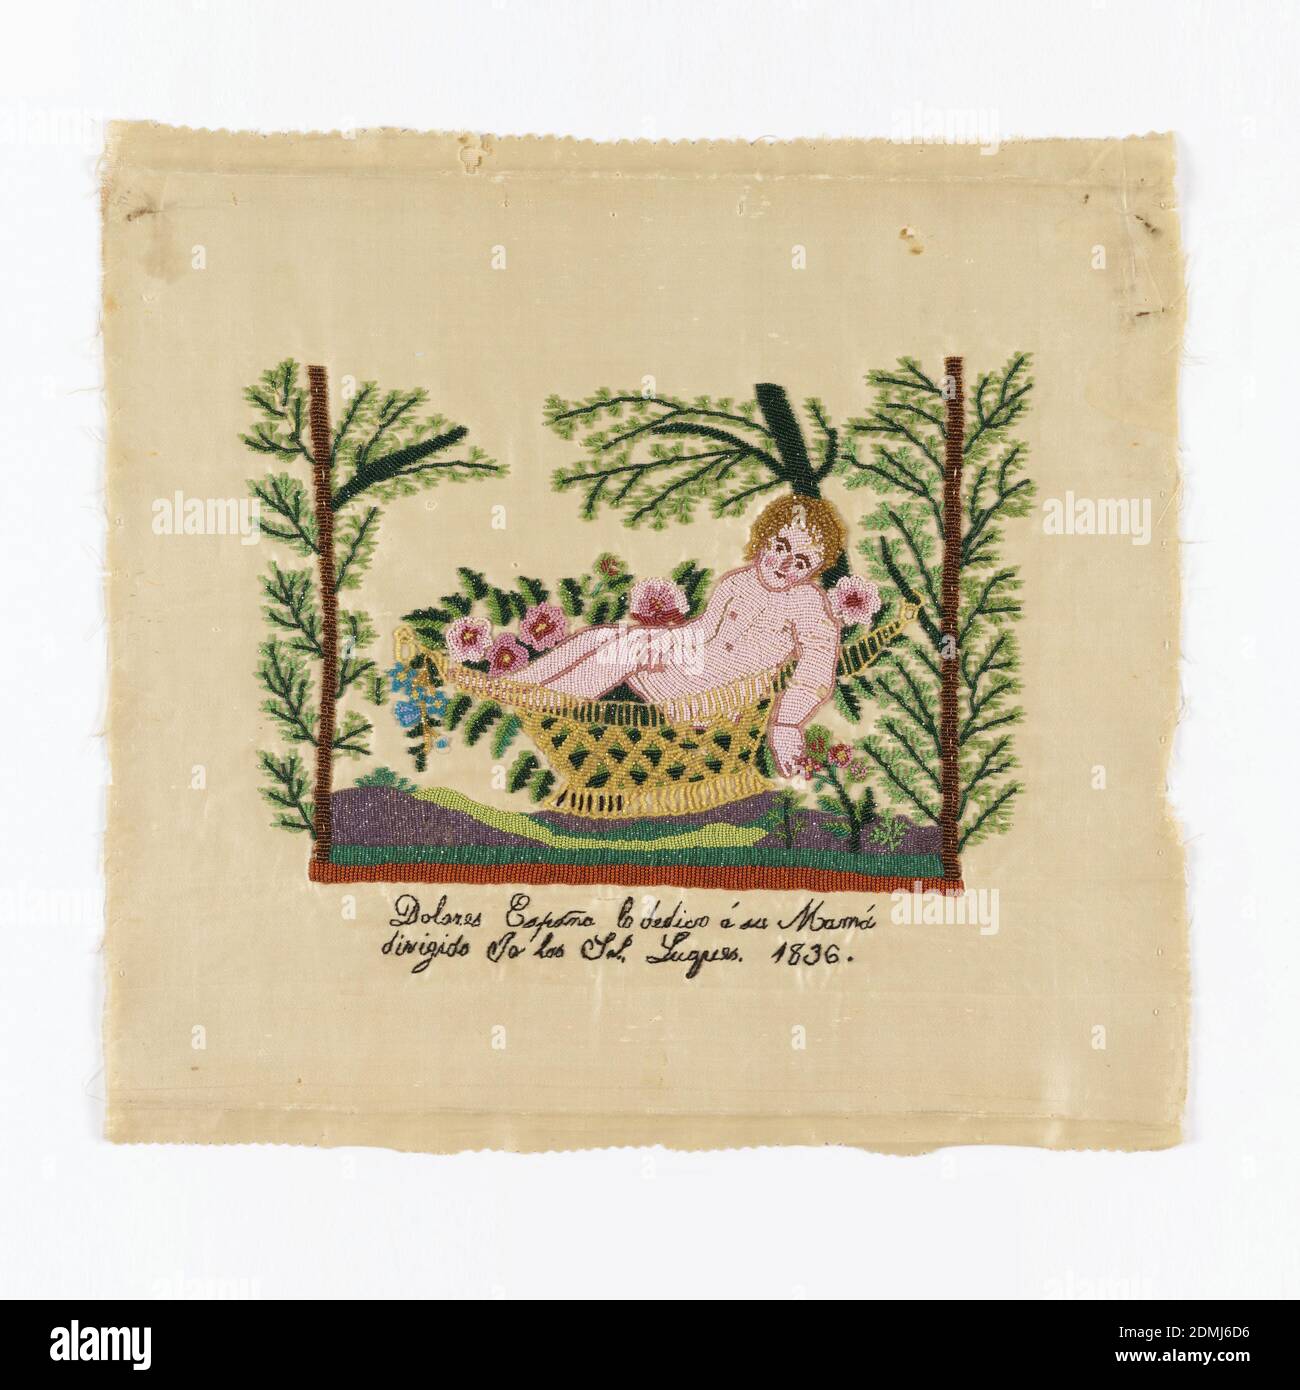 Sampler, Dolores Espoña, Medium: silk and glass beads on silk foundation Technique: beadwork on satin weave, Moses in the Bulrushes. Inscription in back stitch (?) reads 'Dolores Espoña dedicates this to her mother, made at the direction of....', Mexico, 1836, embroidery & stitching, Sampler Stock Photo